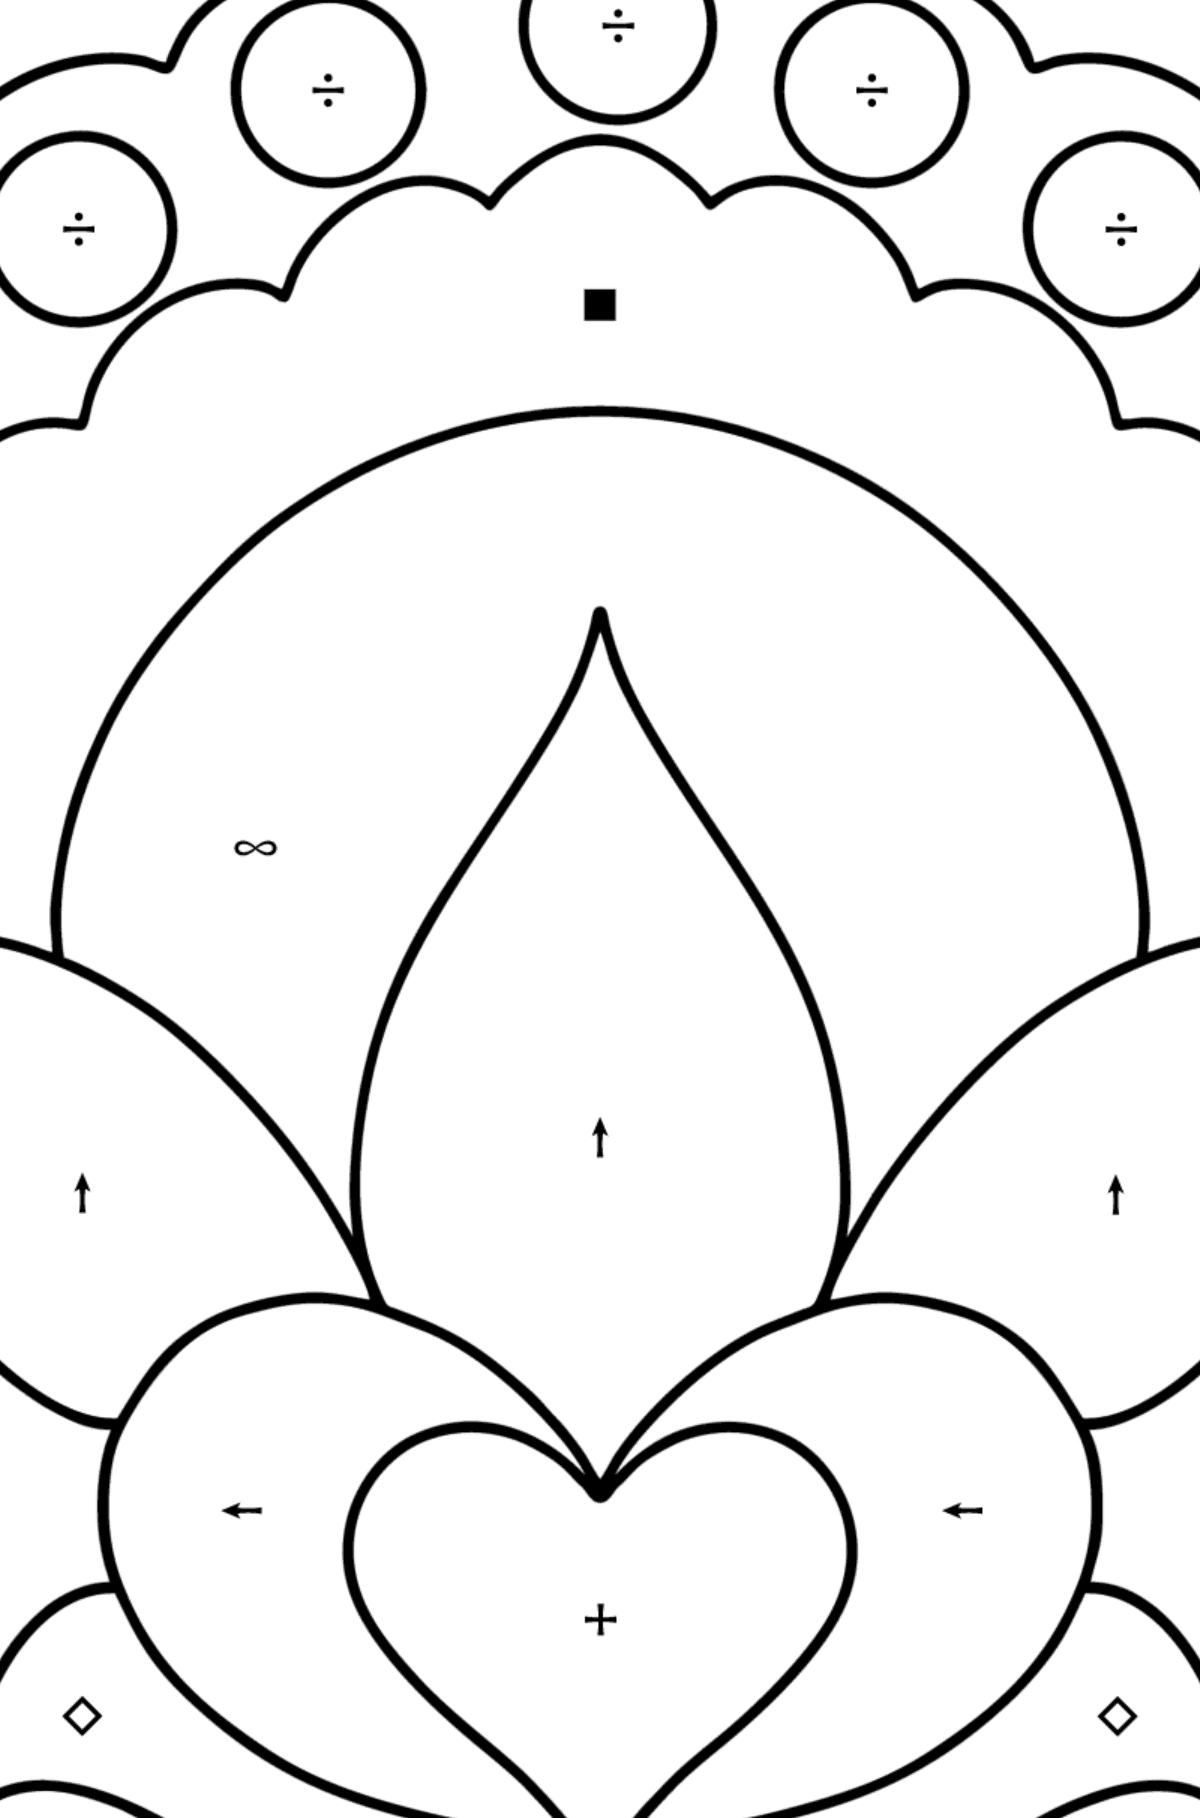 Simple coloring page - Flower Anti stress - Coloring by Symbols for Kids